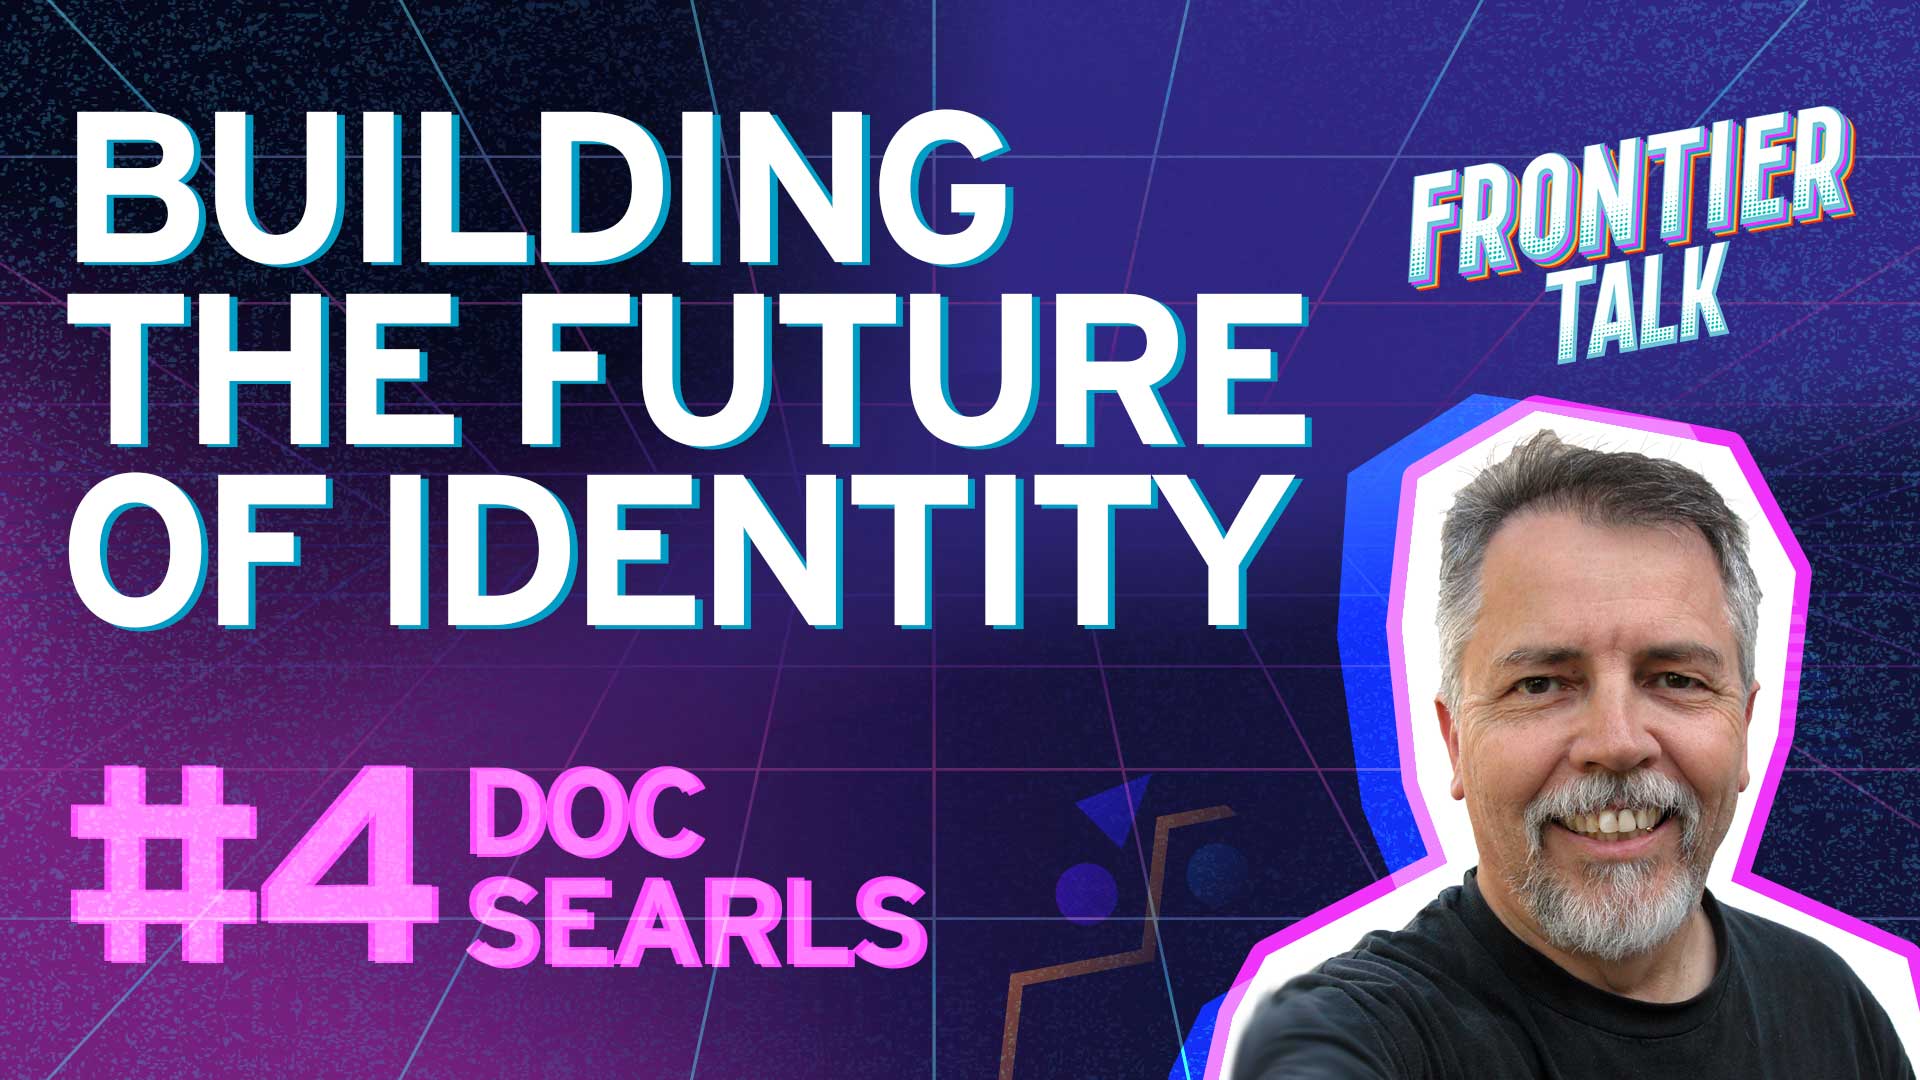 Building the Future of Identity | Frontier Talk #4 - Doc Searls